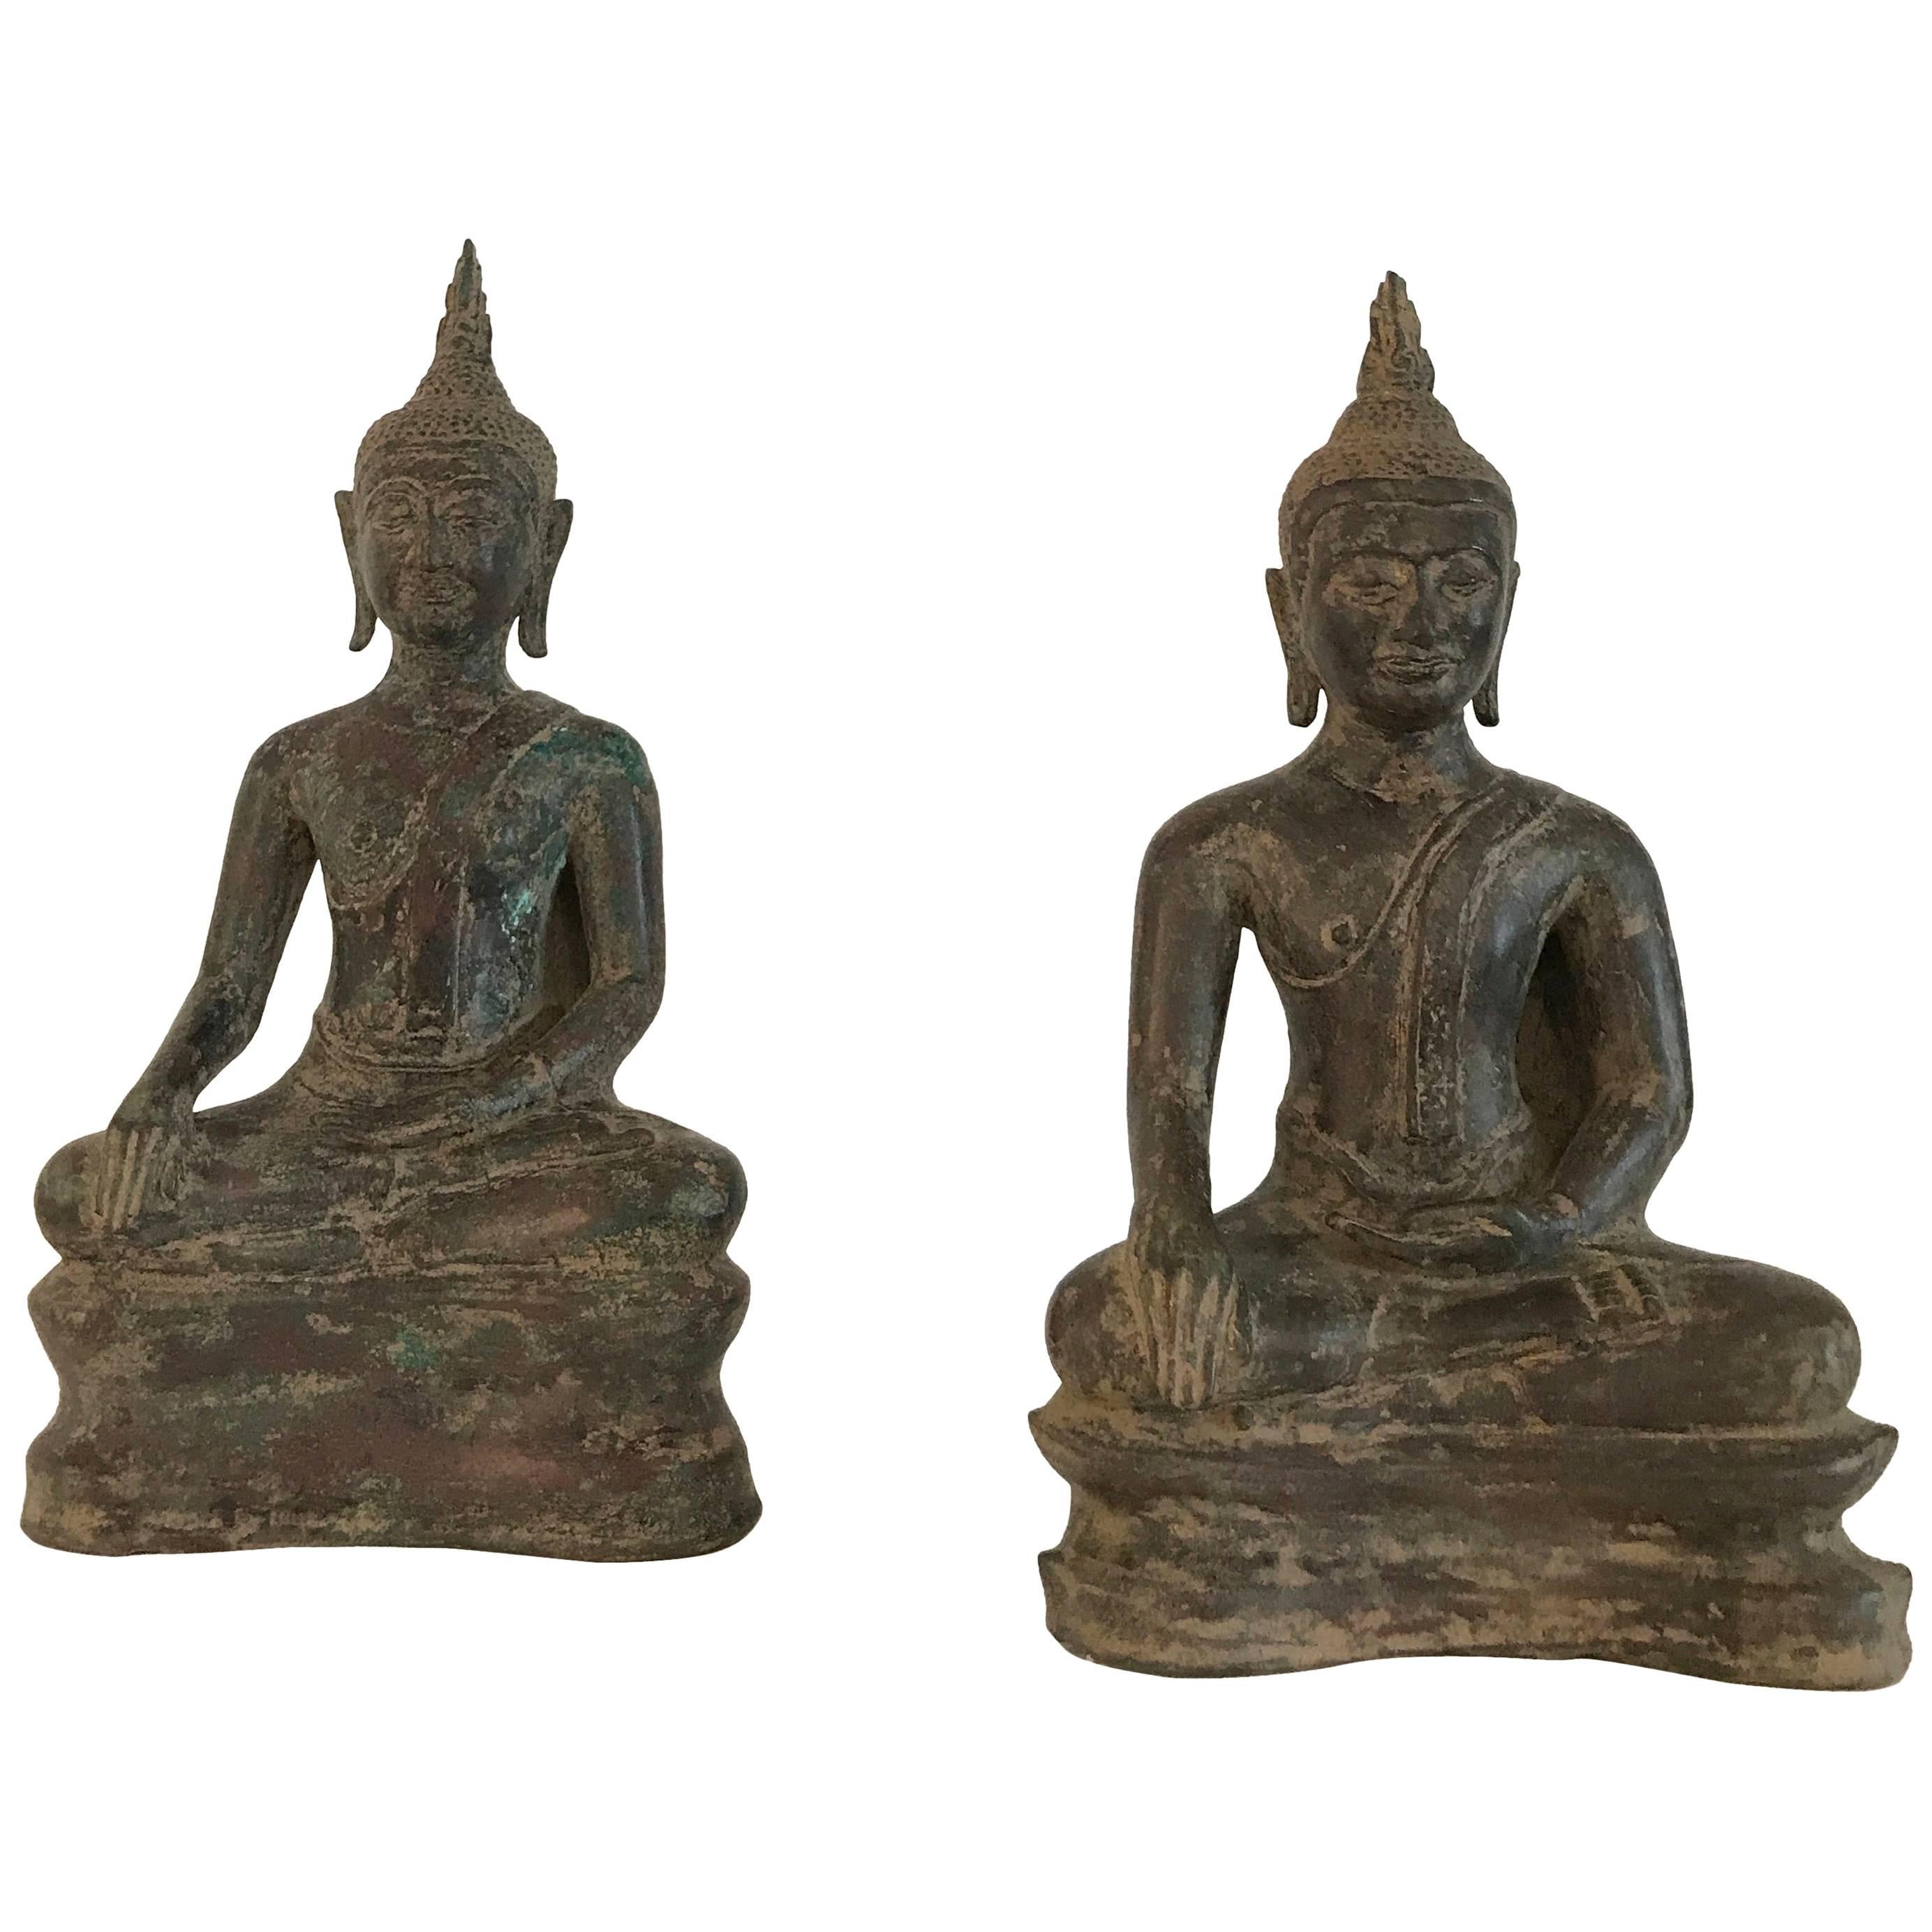 Very Exceptional Almost Identical Pair of Bronze Buddhas